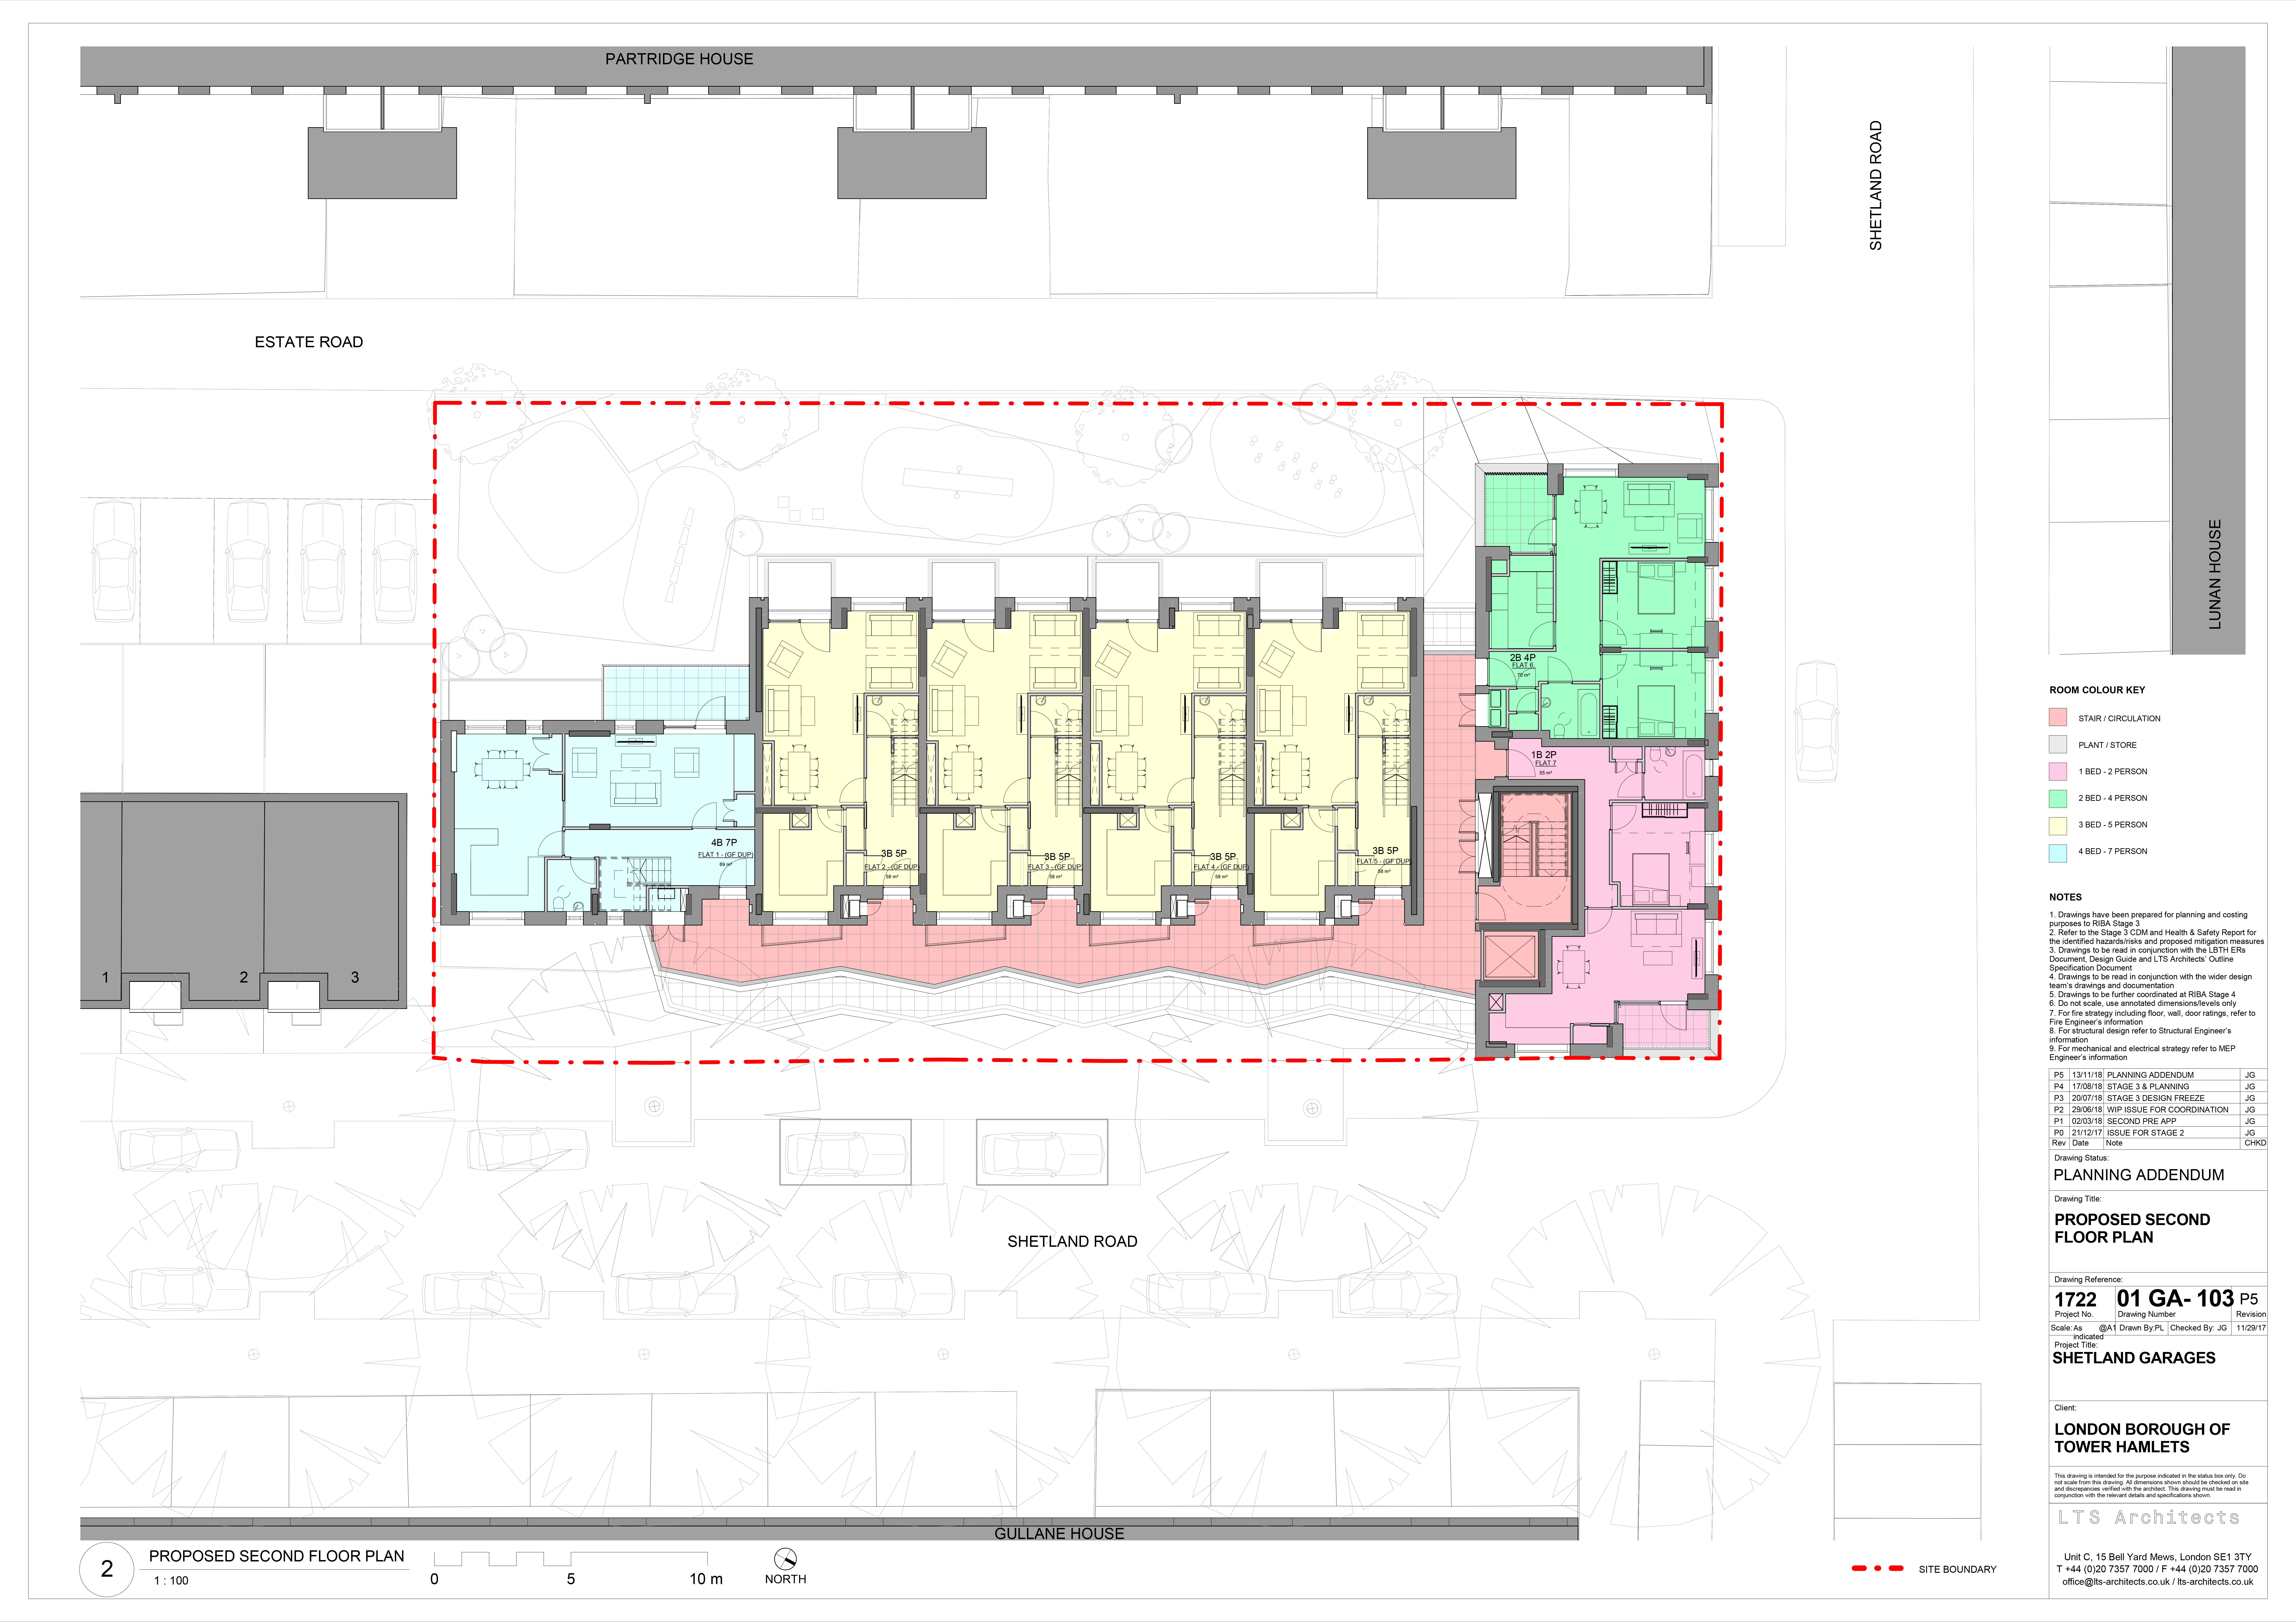 First Floor Plan shetland garages tower hamlets lts architects planning permisson granted